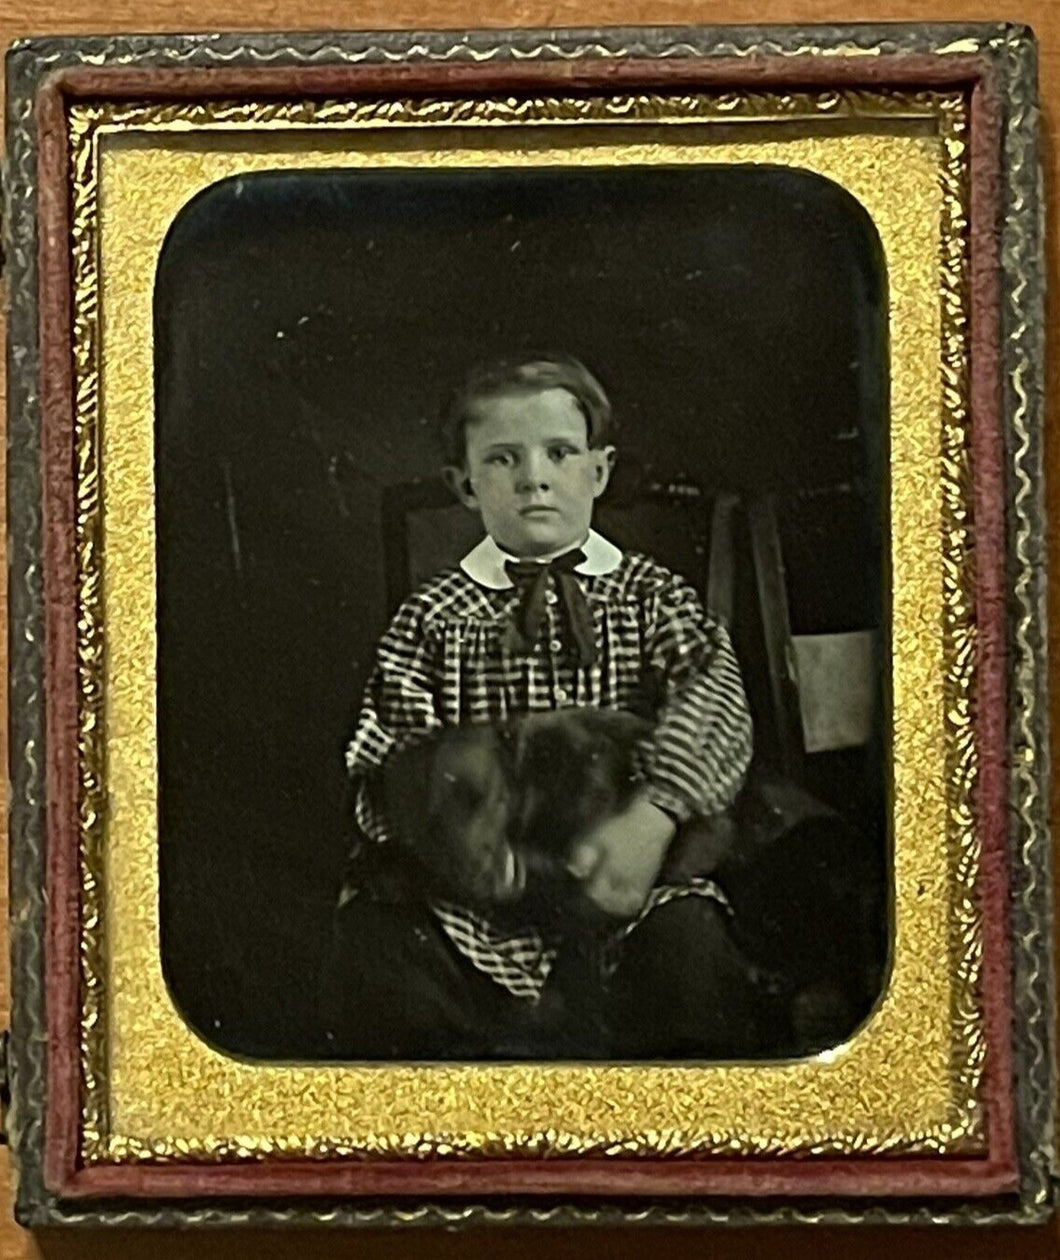 Boy Holding Restless Dog - Or Two Dogs / Motion Blur? 1/6 Daguerreotype